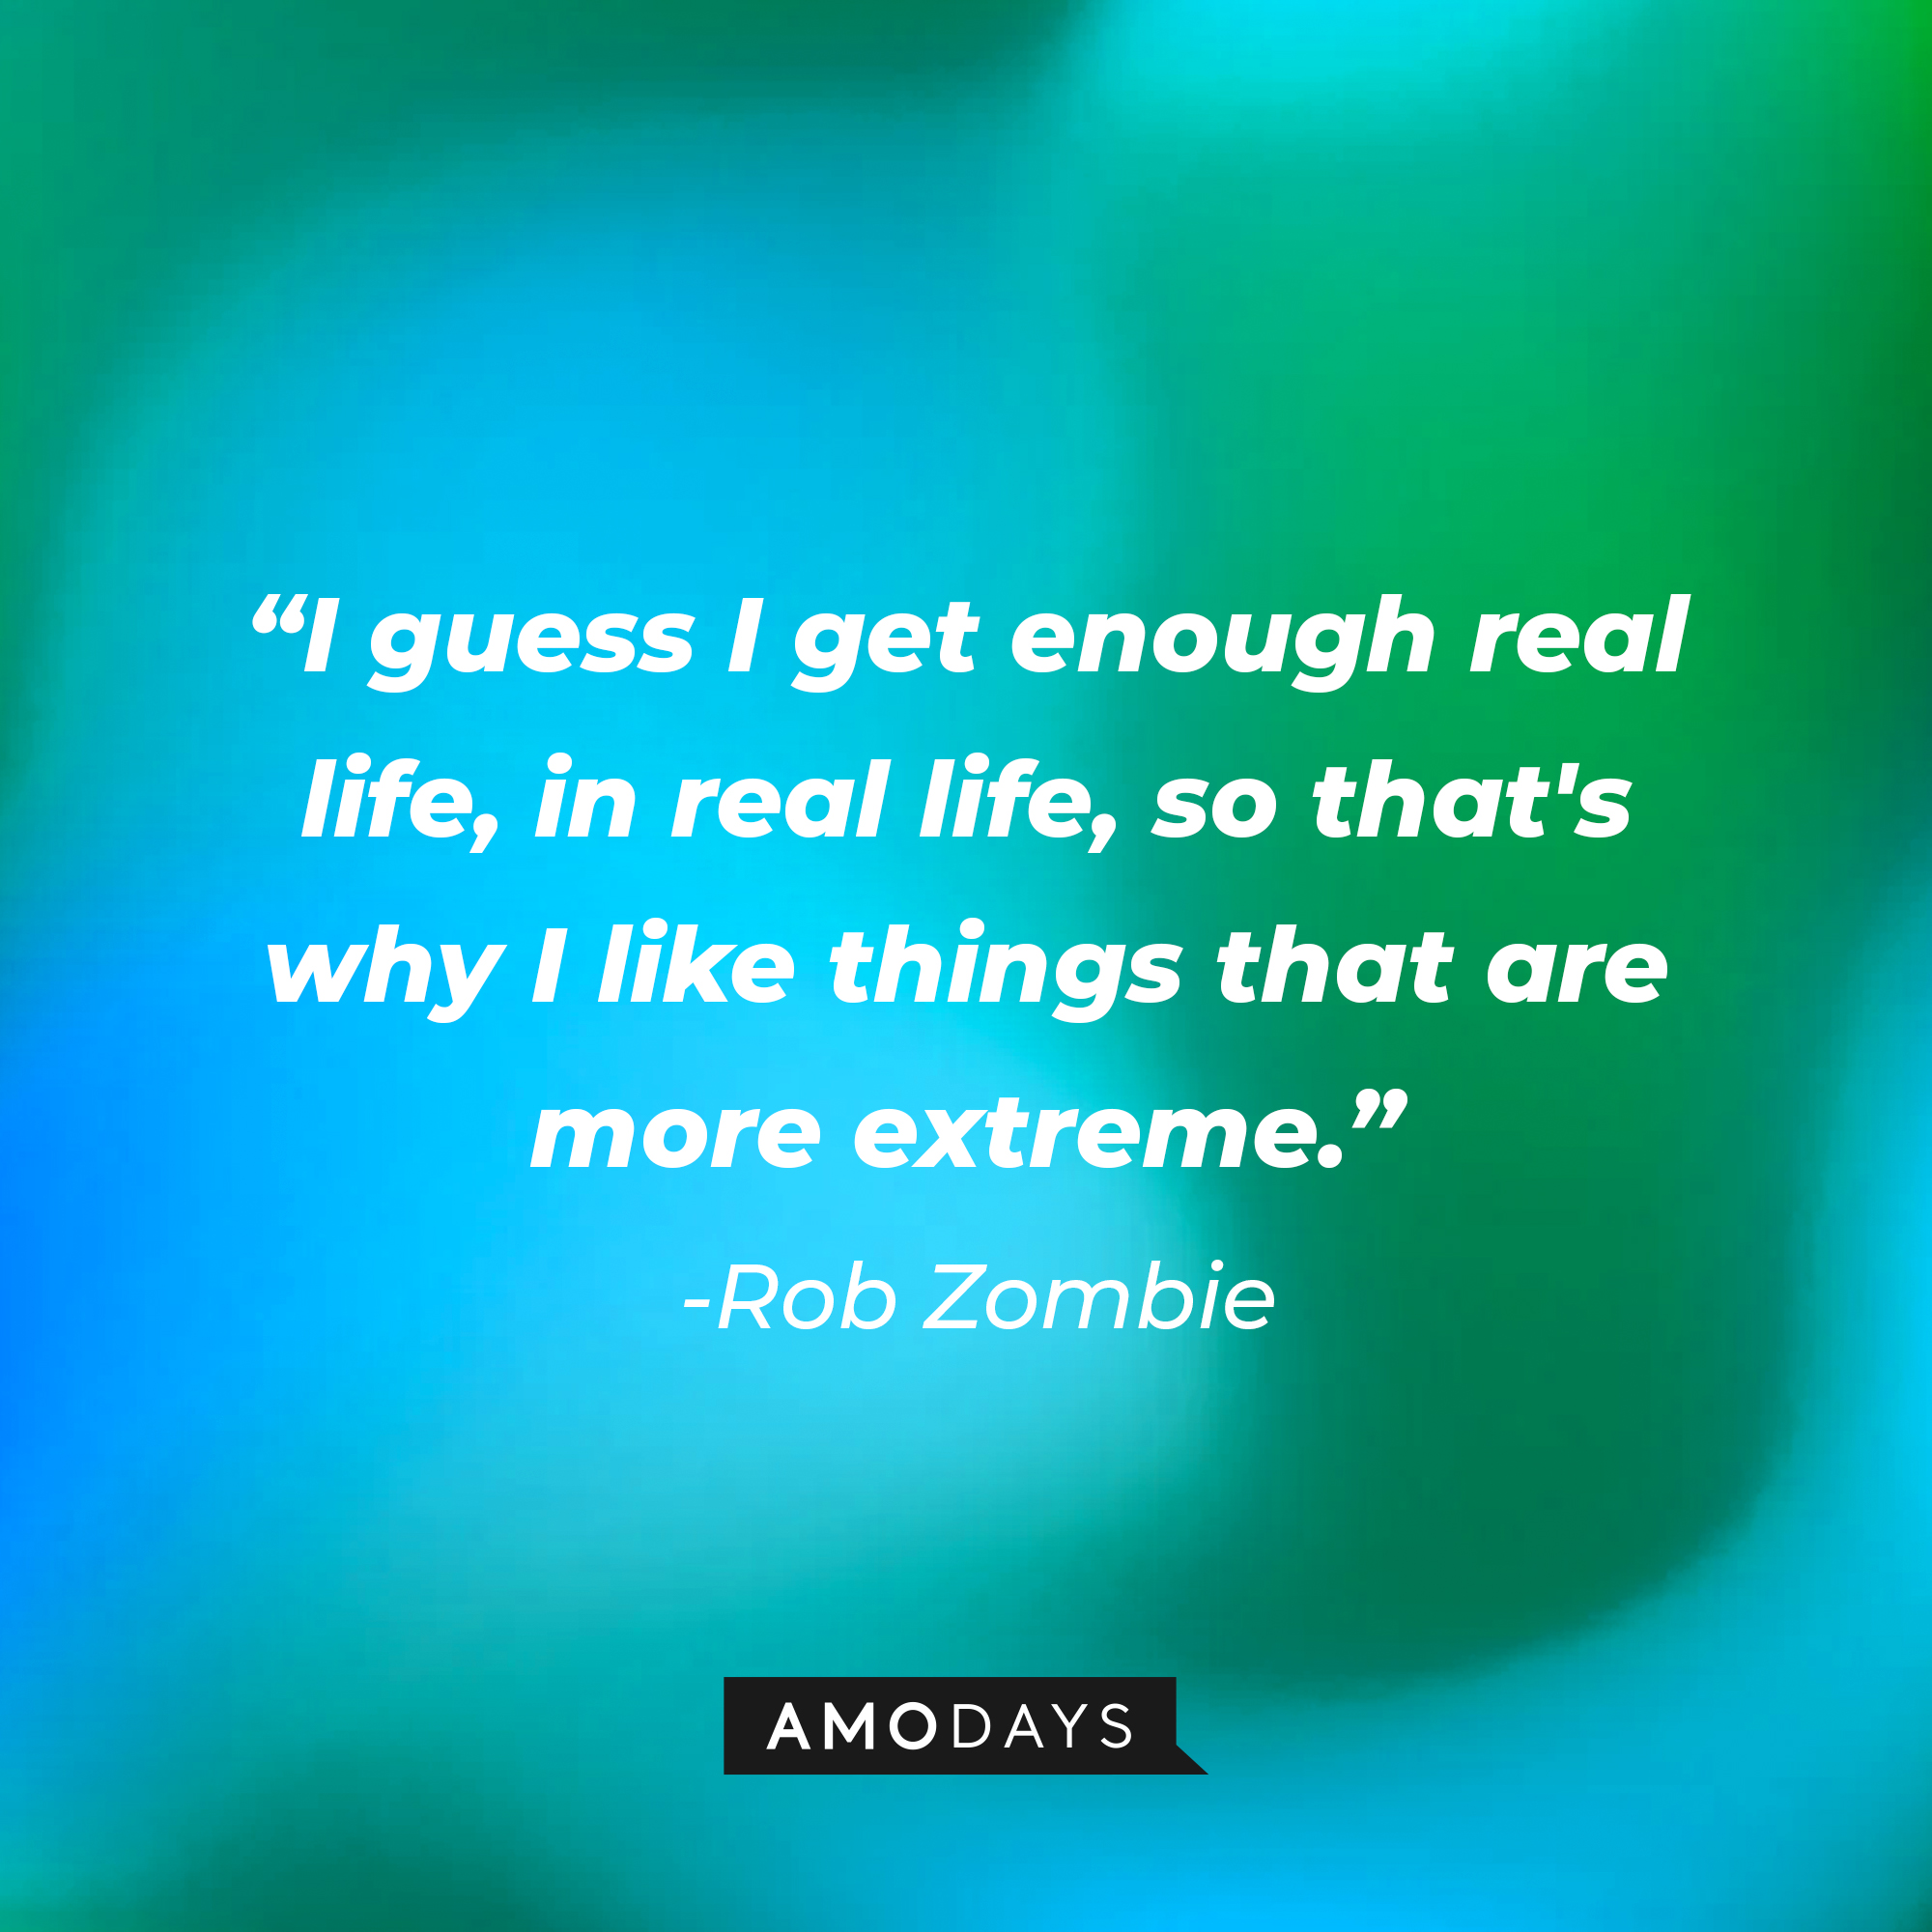 Rob Zombie's quote "I guess I get enough real life, in real life, so that's why I like things that are more extreme." | Source: AmoDays